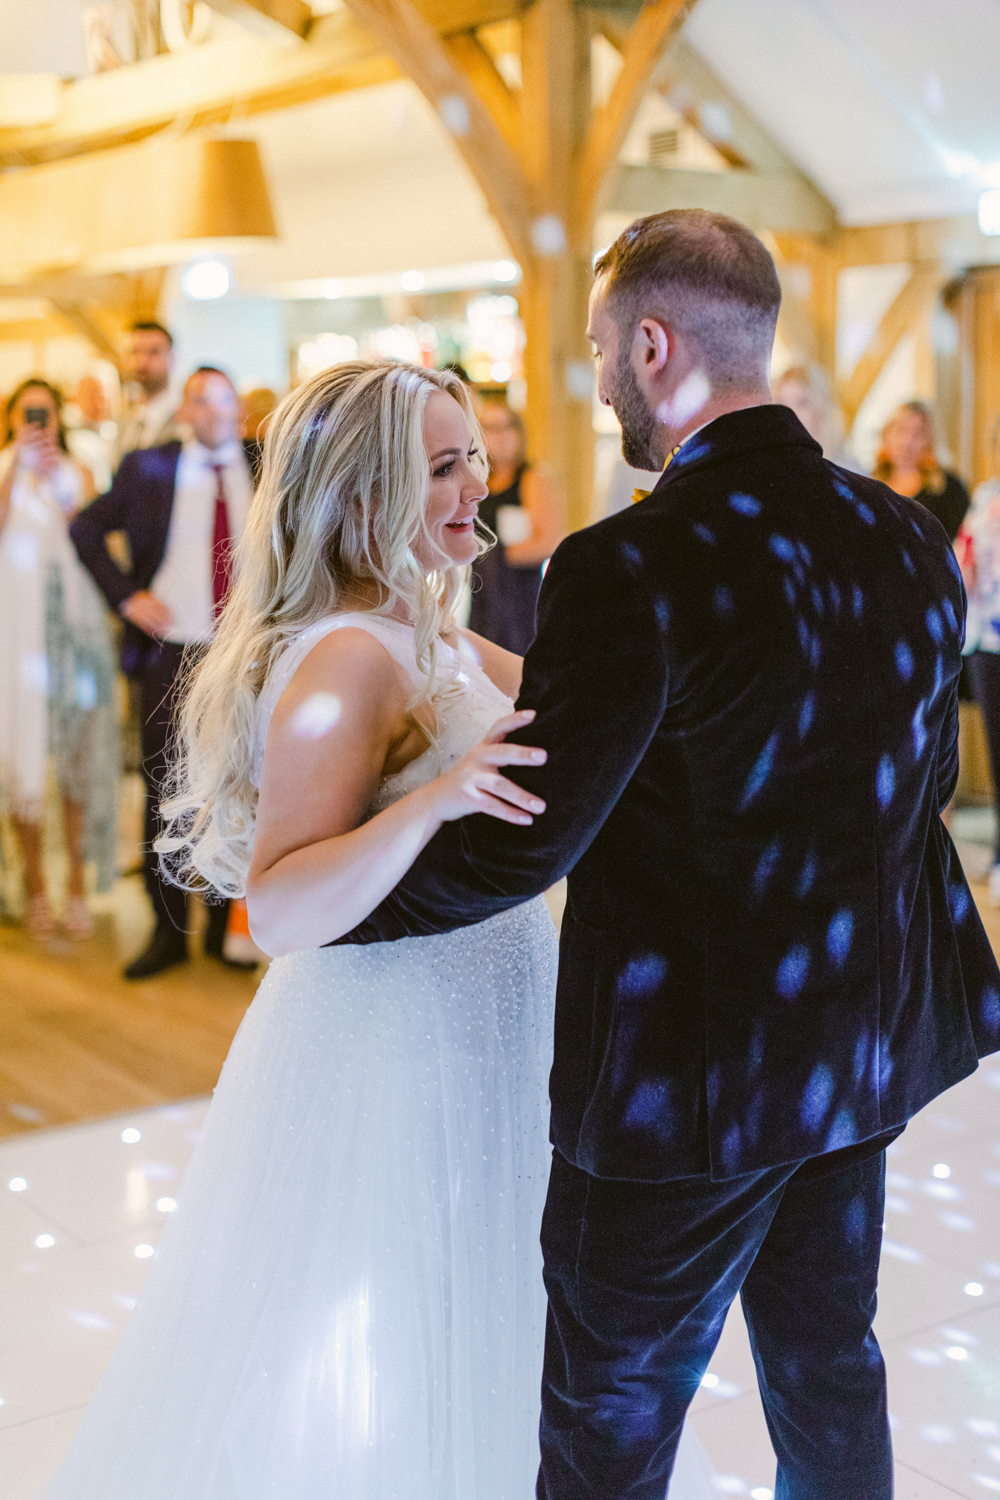 Bride and Groom dance in the barn at Brinsop Court